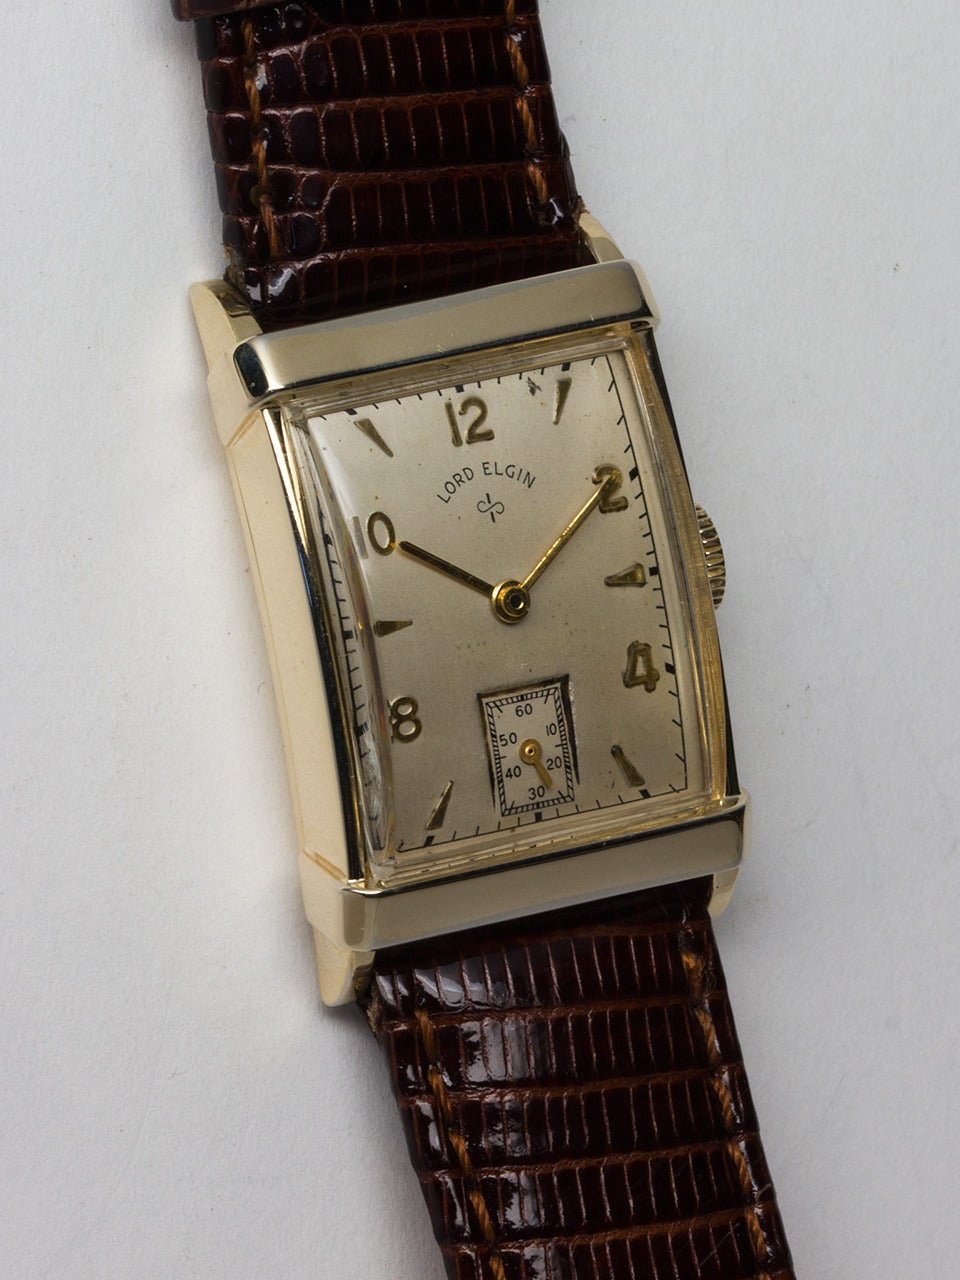 Lord Elgin Yellow Gold Filled Dress Model Wristwatch circa 1940s. Rectangular case measuring 35 x 21mm with low domed crystal. Original matte silvered dial with applied even numbers and alternating triangular markers. Powered by manual wind movement